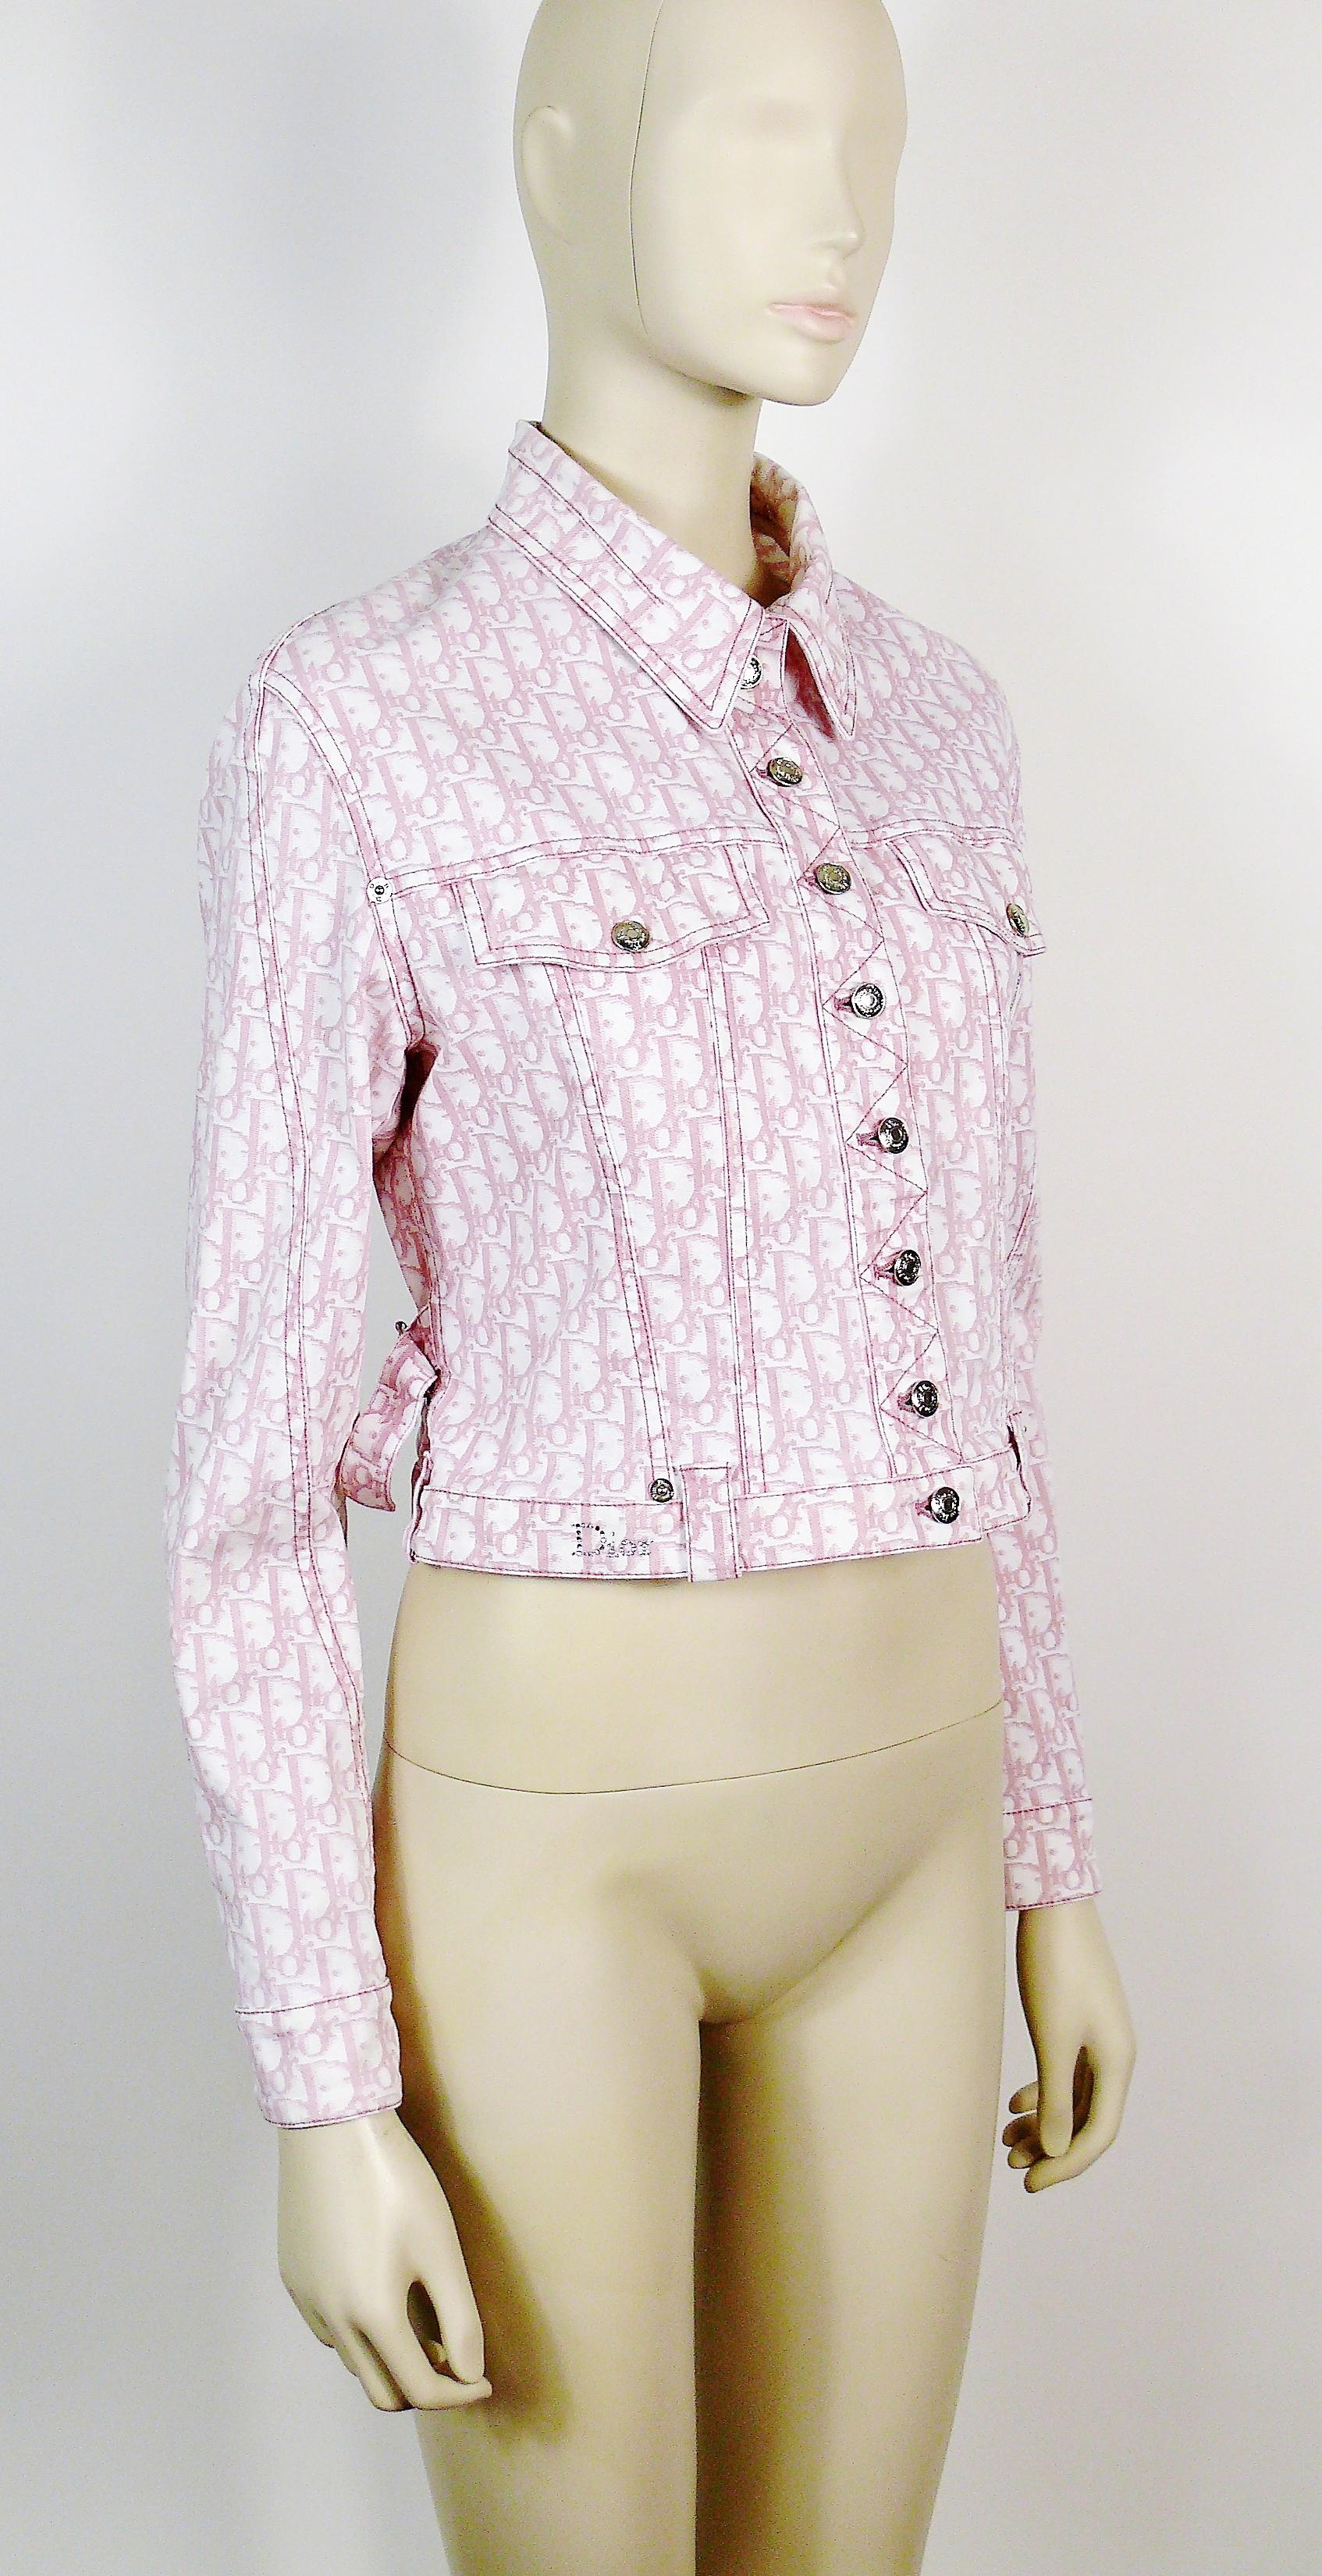 CHRISTIAN DIOR by JOHN GALLIANO pink monogram denim jacket.

This jacket features :
- Soft and slightly stretch cotton blend fabric.
- Long sleeves.
- Buttoning along the front.
- Diamante outlined 1 at the breast pocket and diamante logo at the